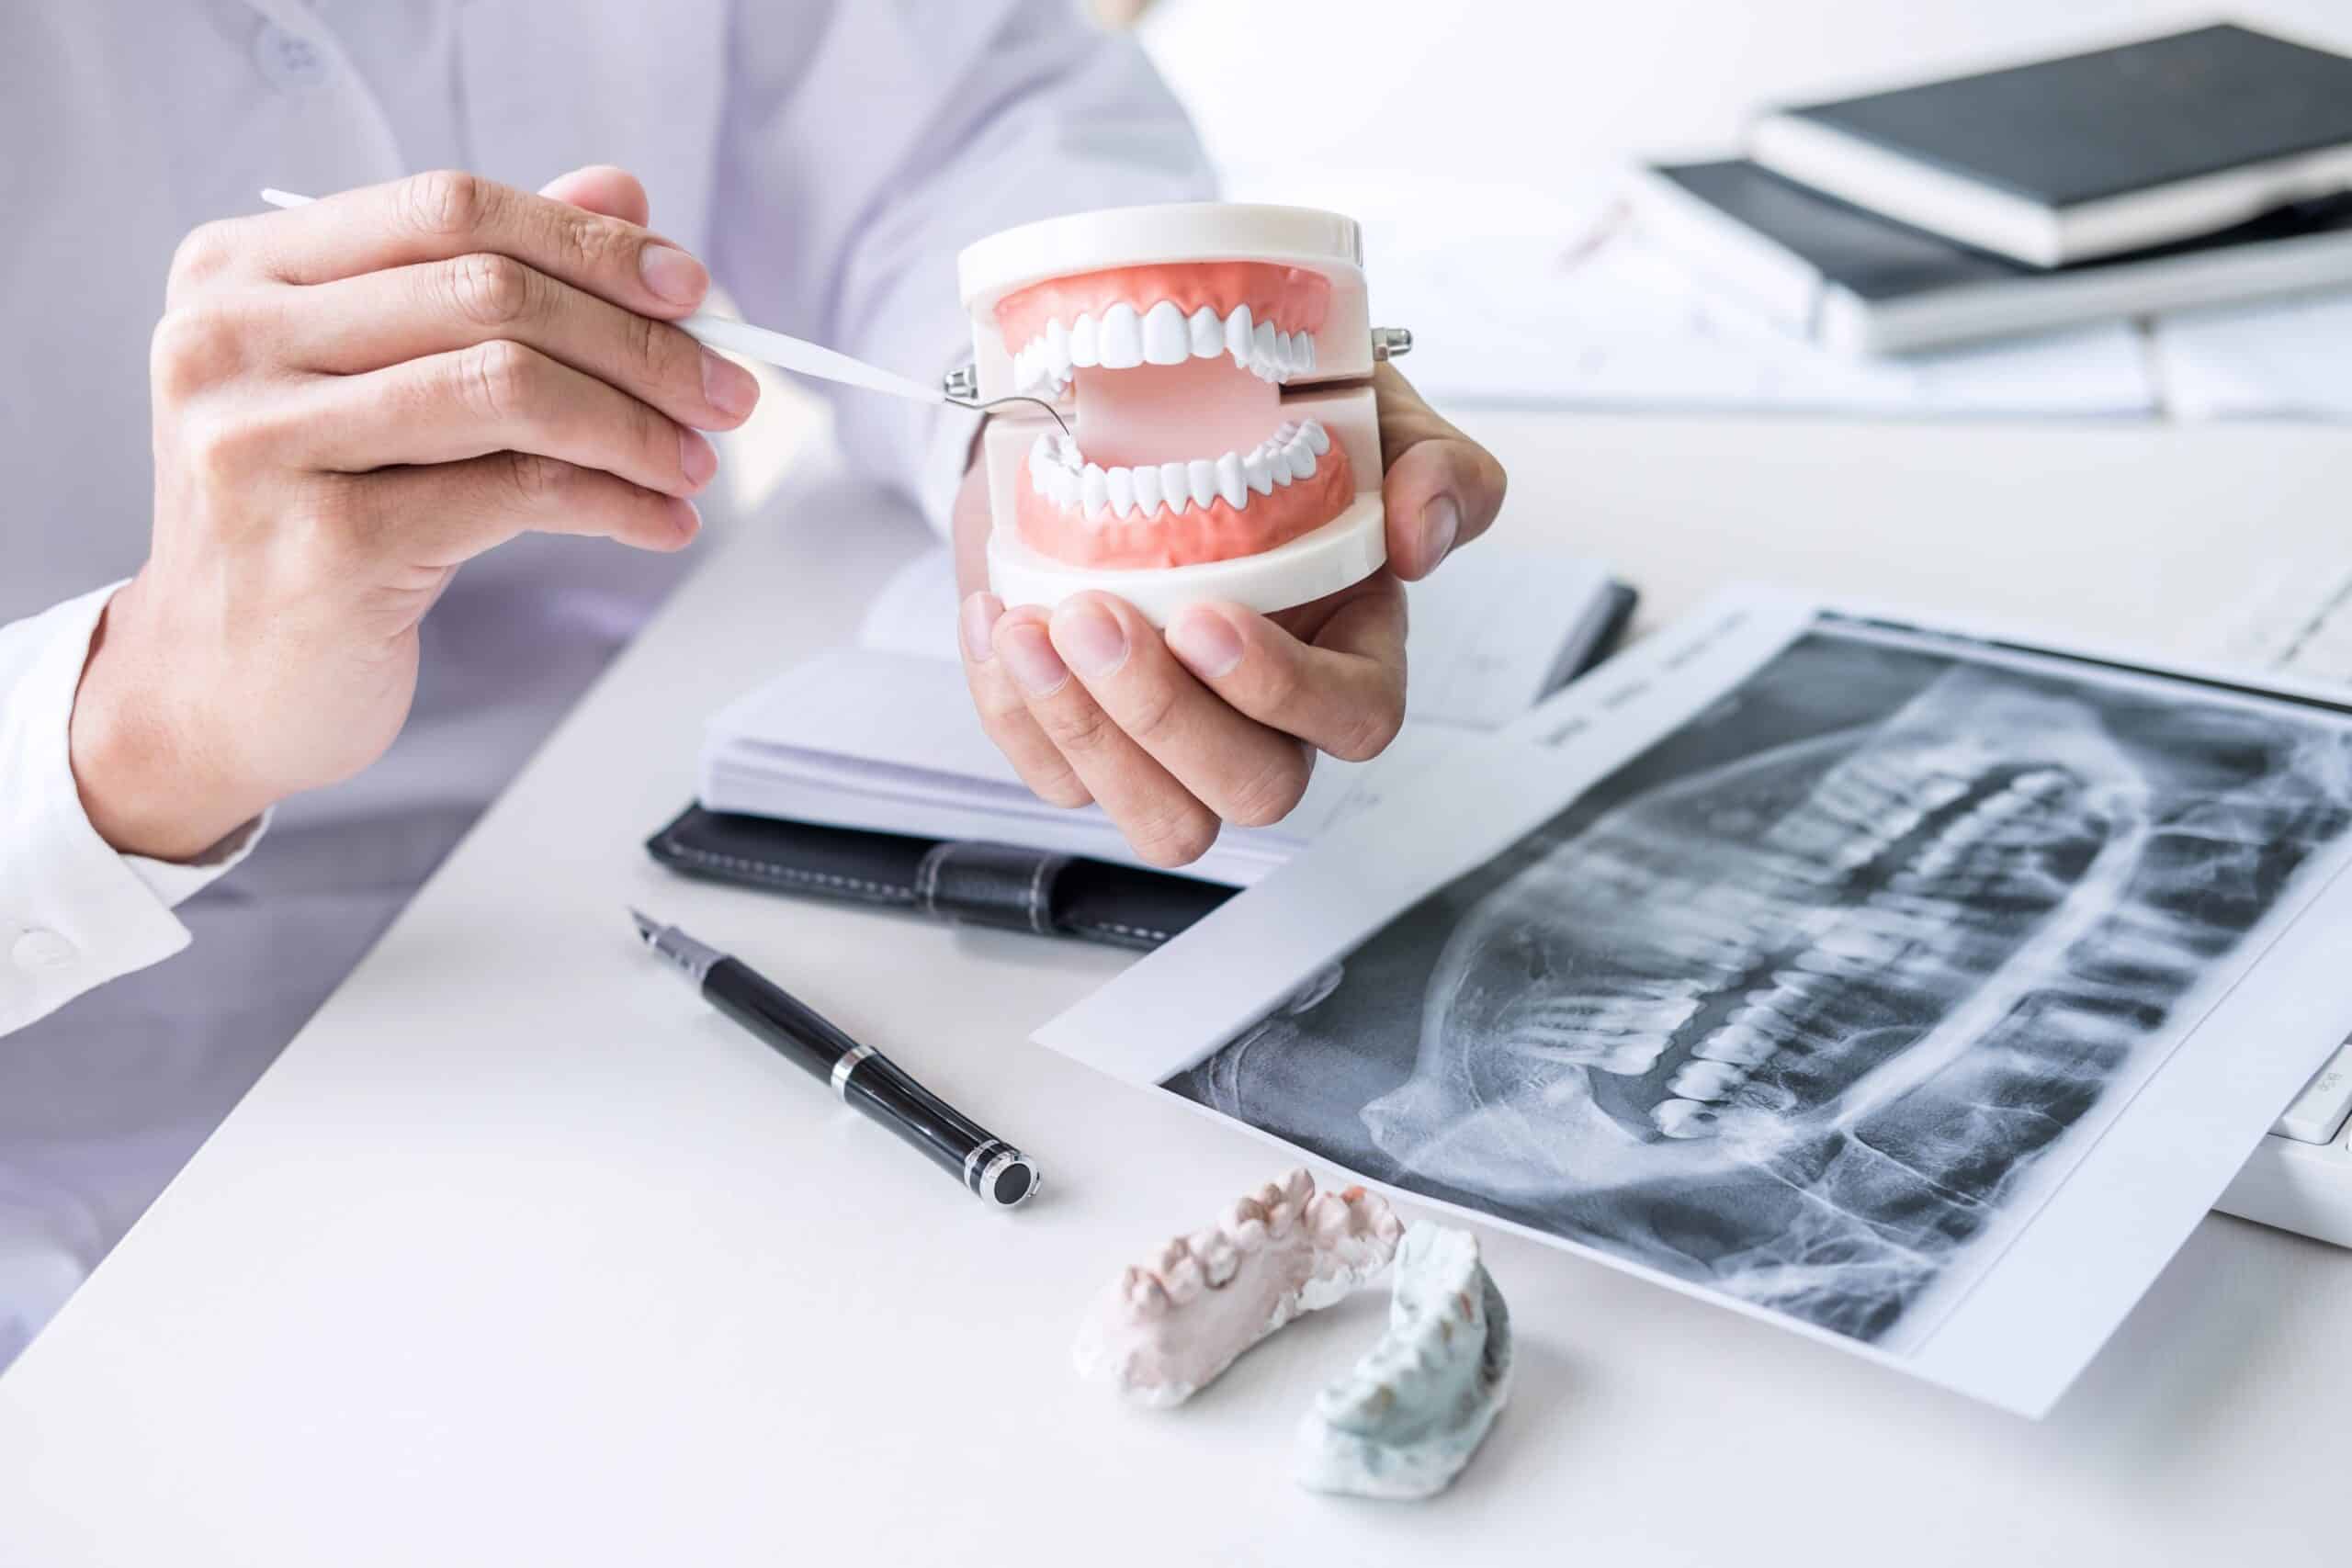 General dentistry helps you maintain healthy teeth and gums through regular check-ups, cleanings, and more.